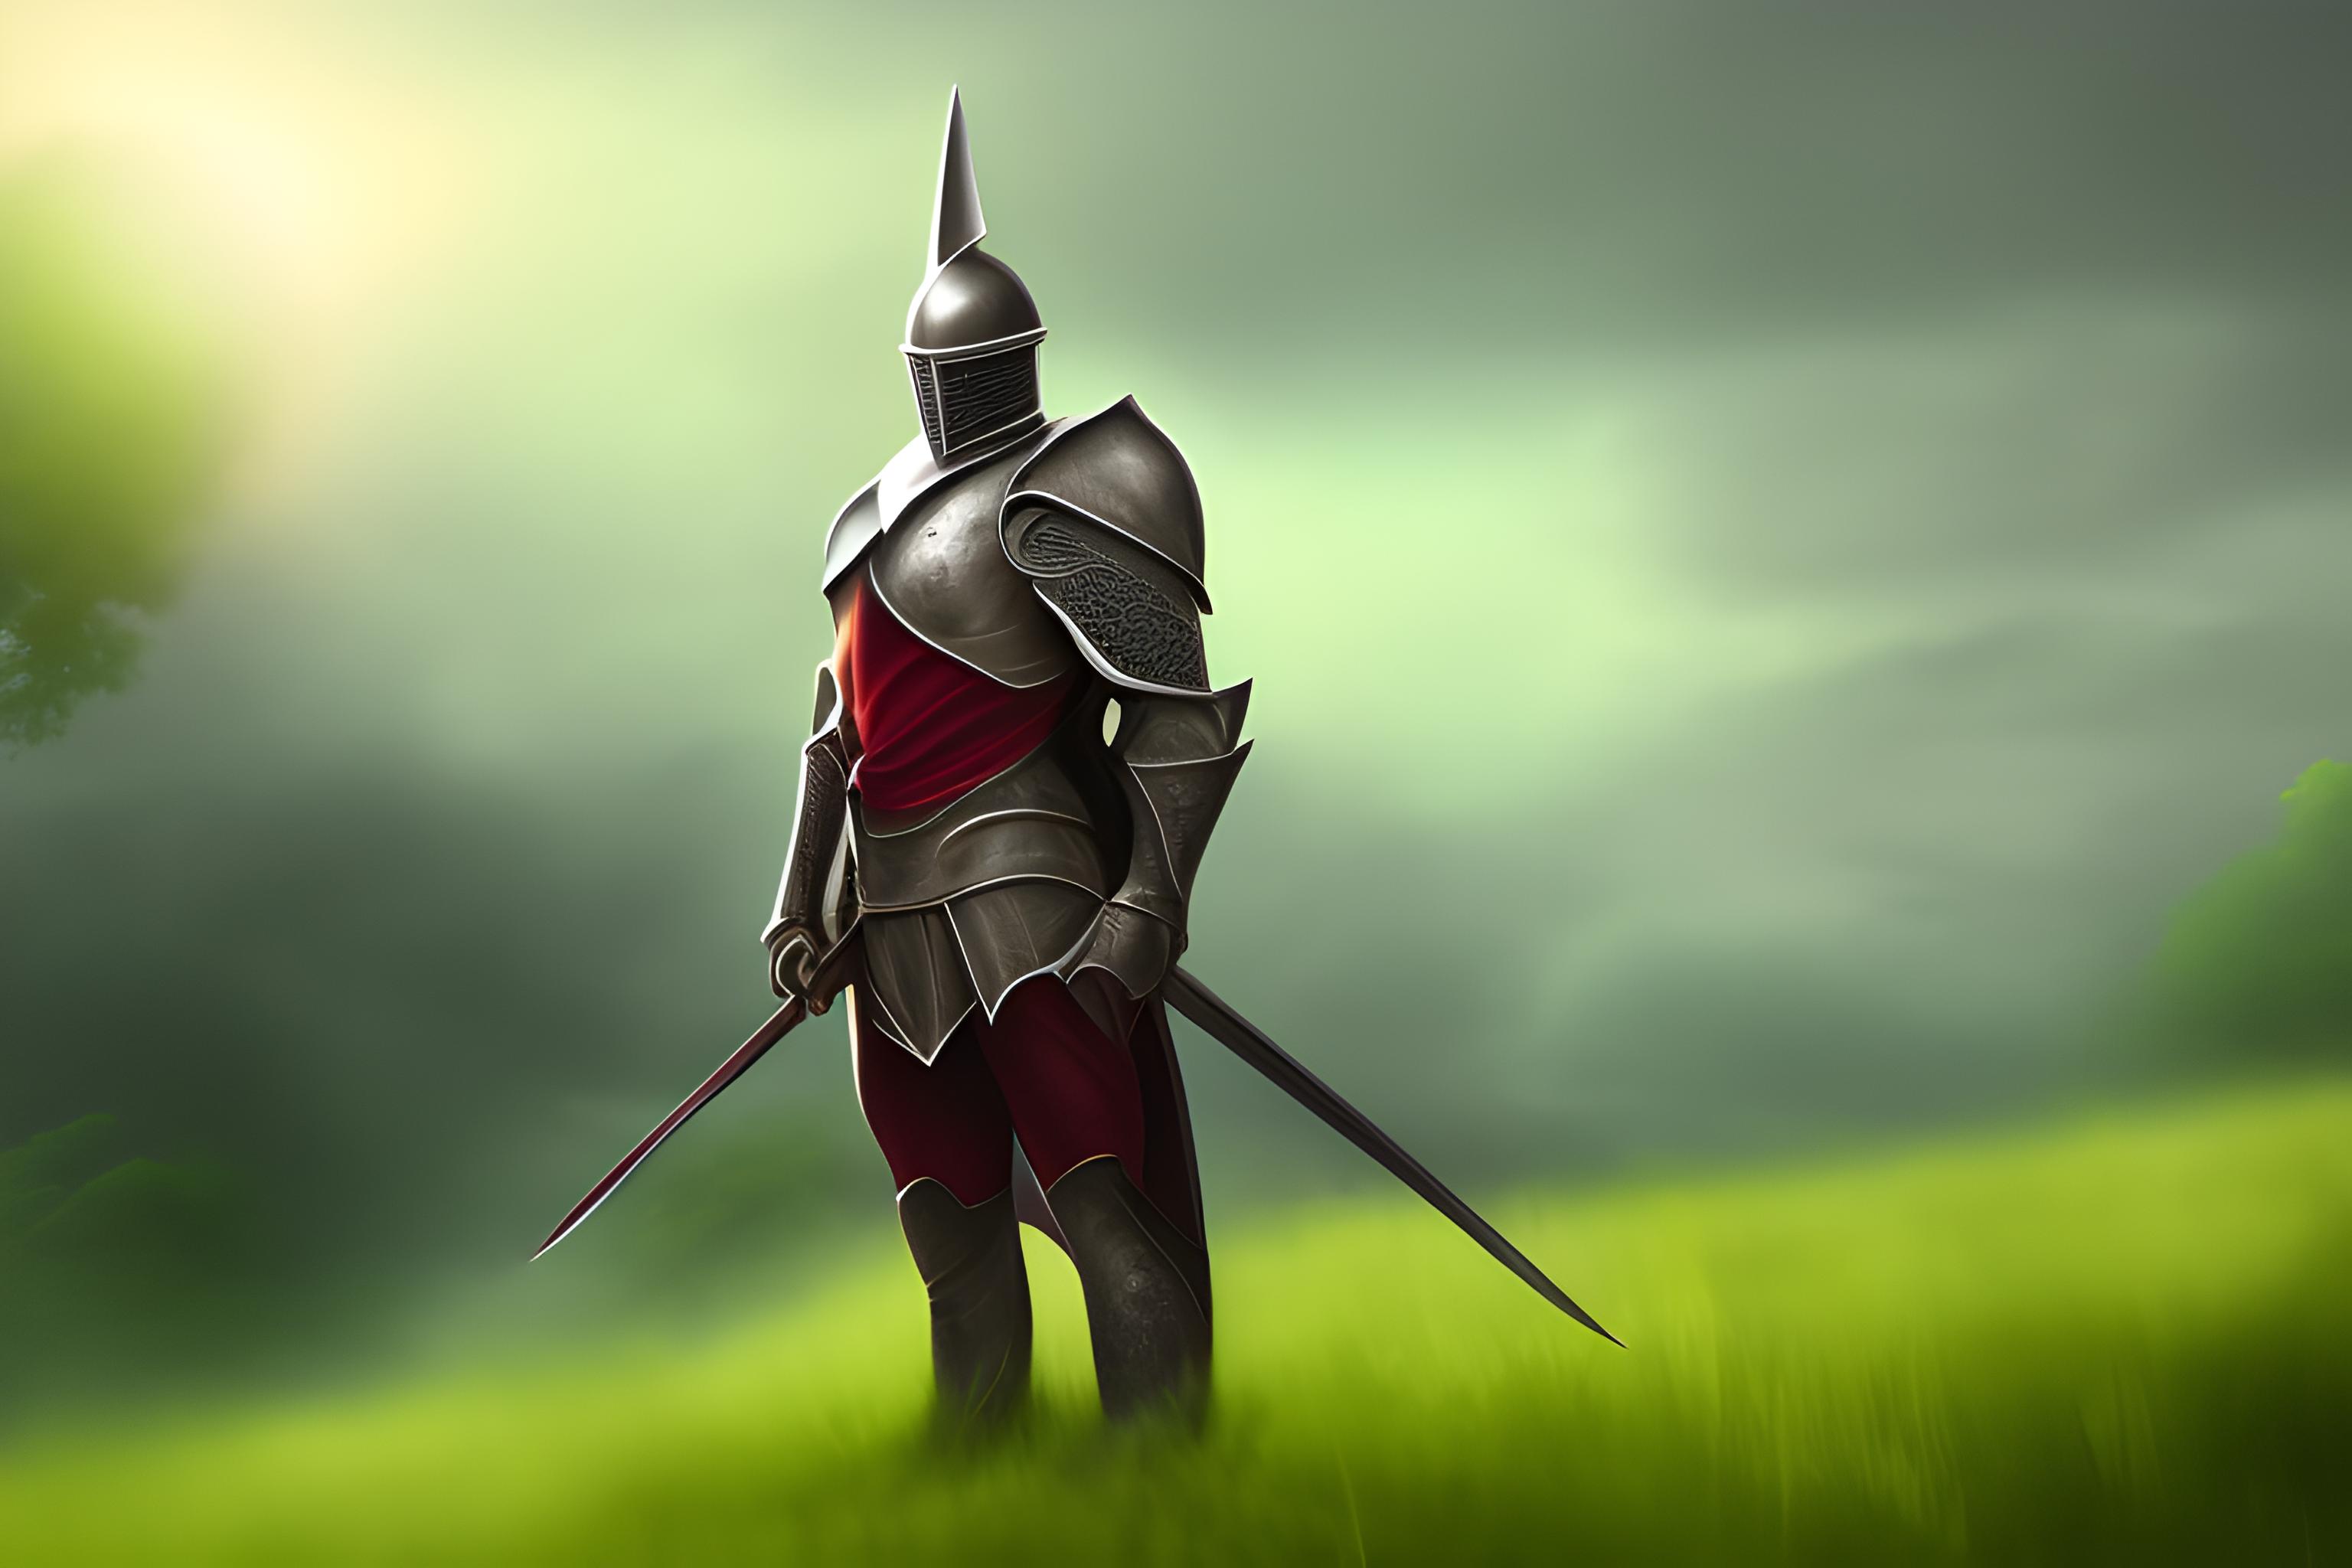 000000 165411453 kdpmpp2m15 PS7.5 Emerald Knight, Bloody Grassy Hill, Heroic Pose, Sun Rising after a thunderstorm.. digital art concept art [upscaled]